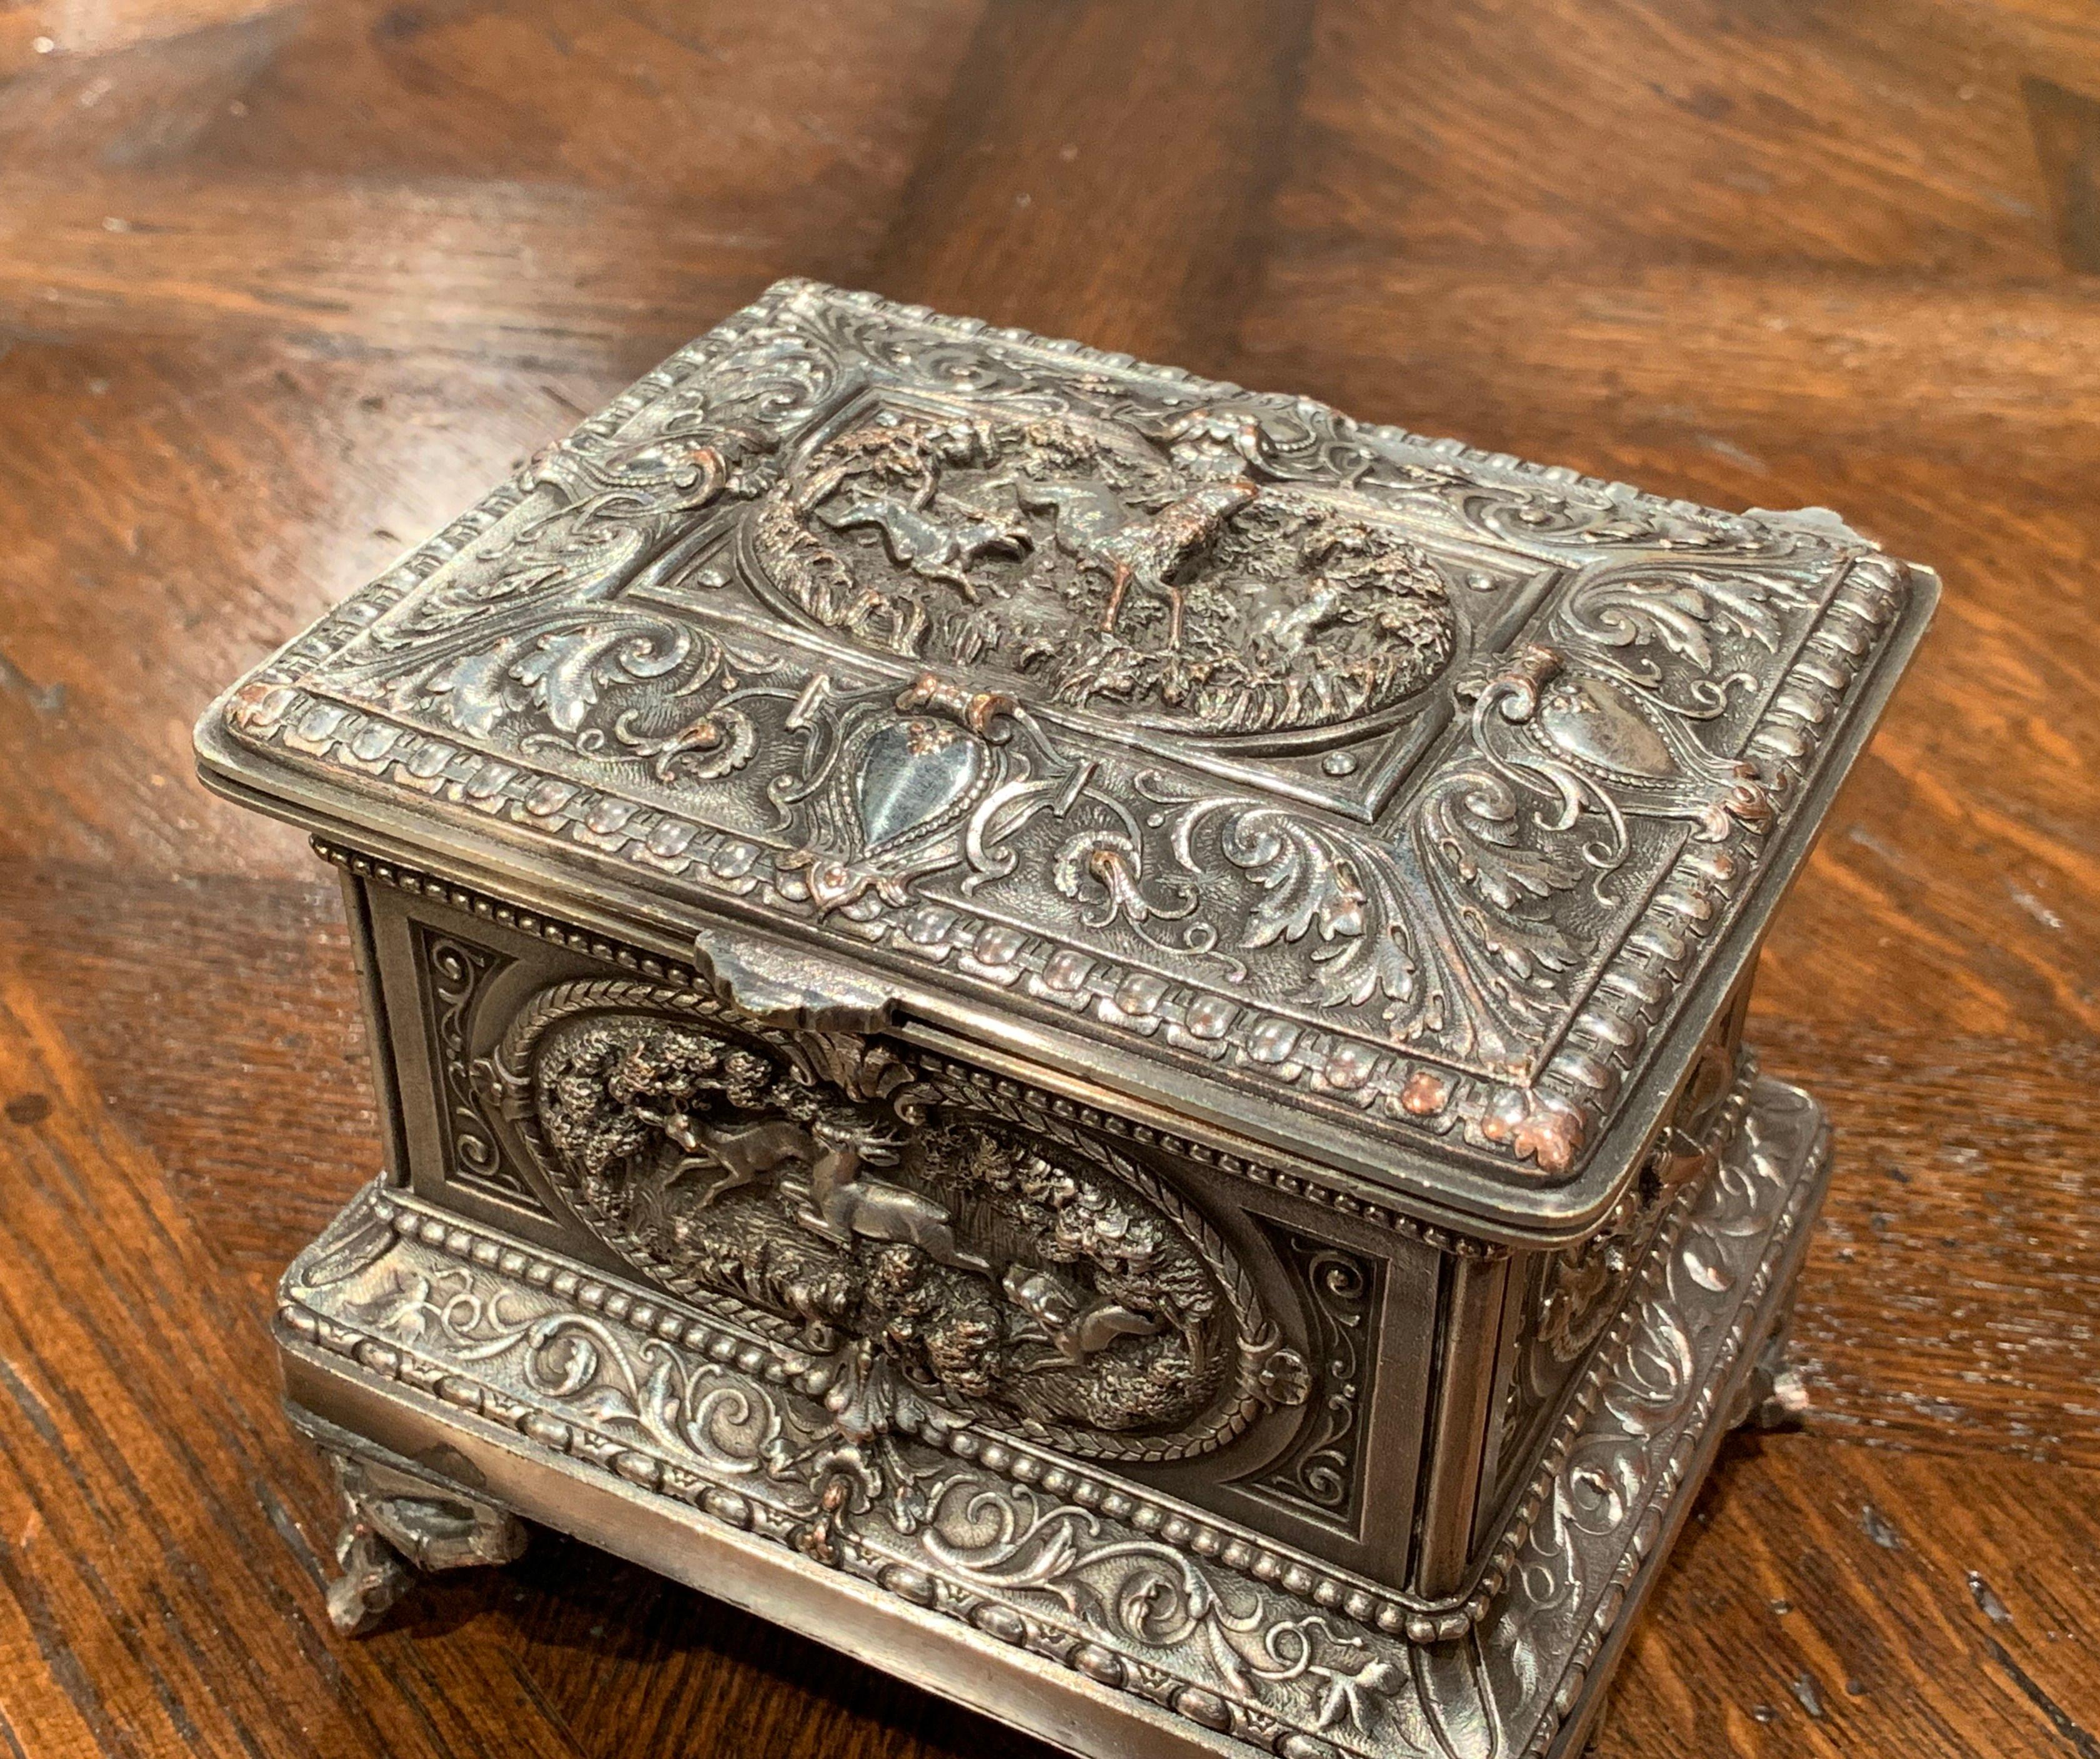 Napoleon III 19th Century French Silver Plated on Copper Jewelry Box with Repoussé Hunt Motif